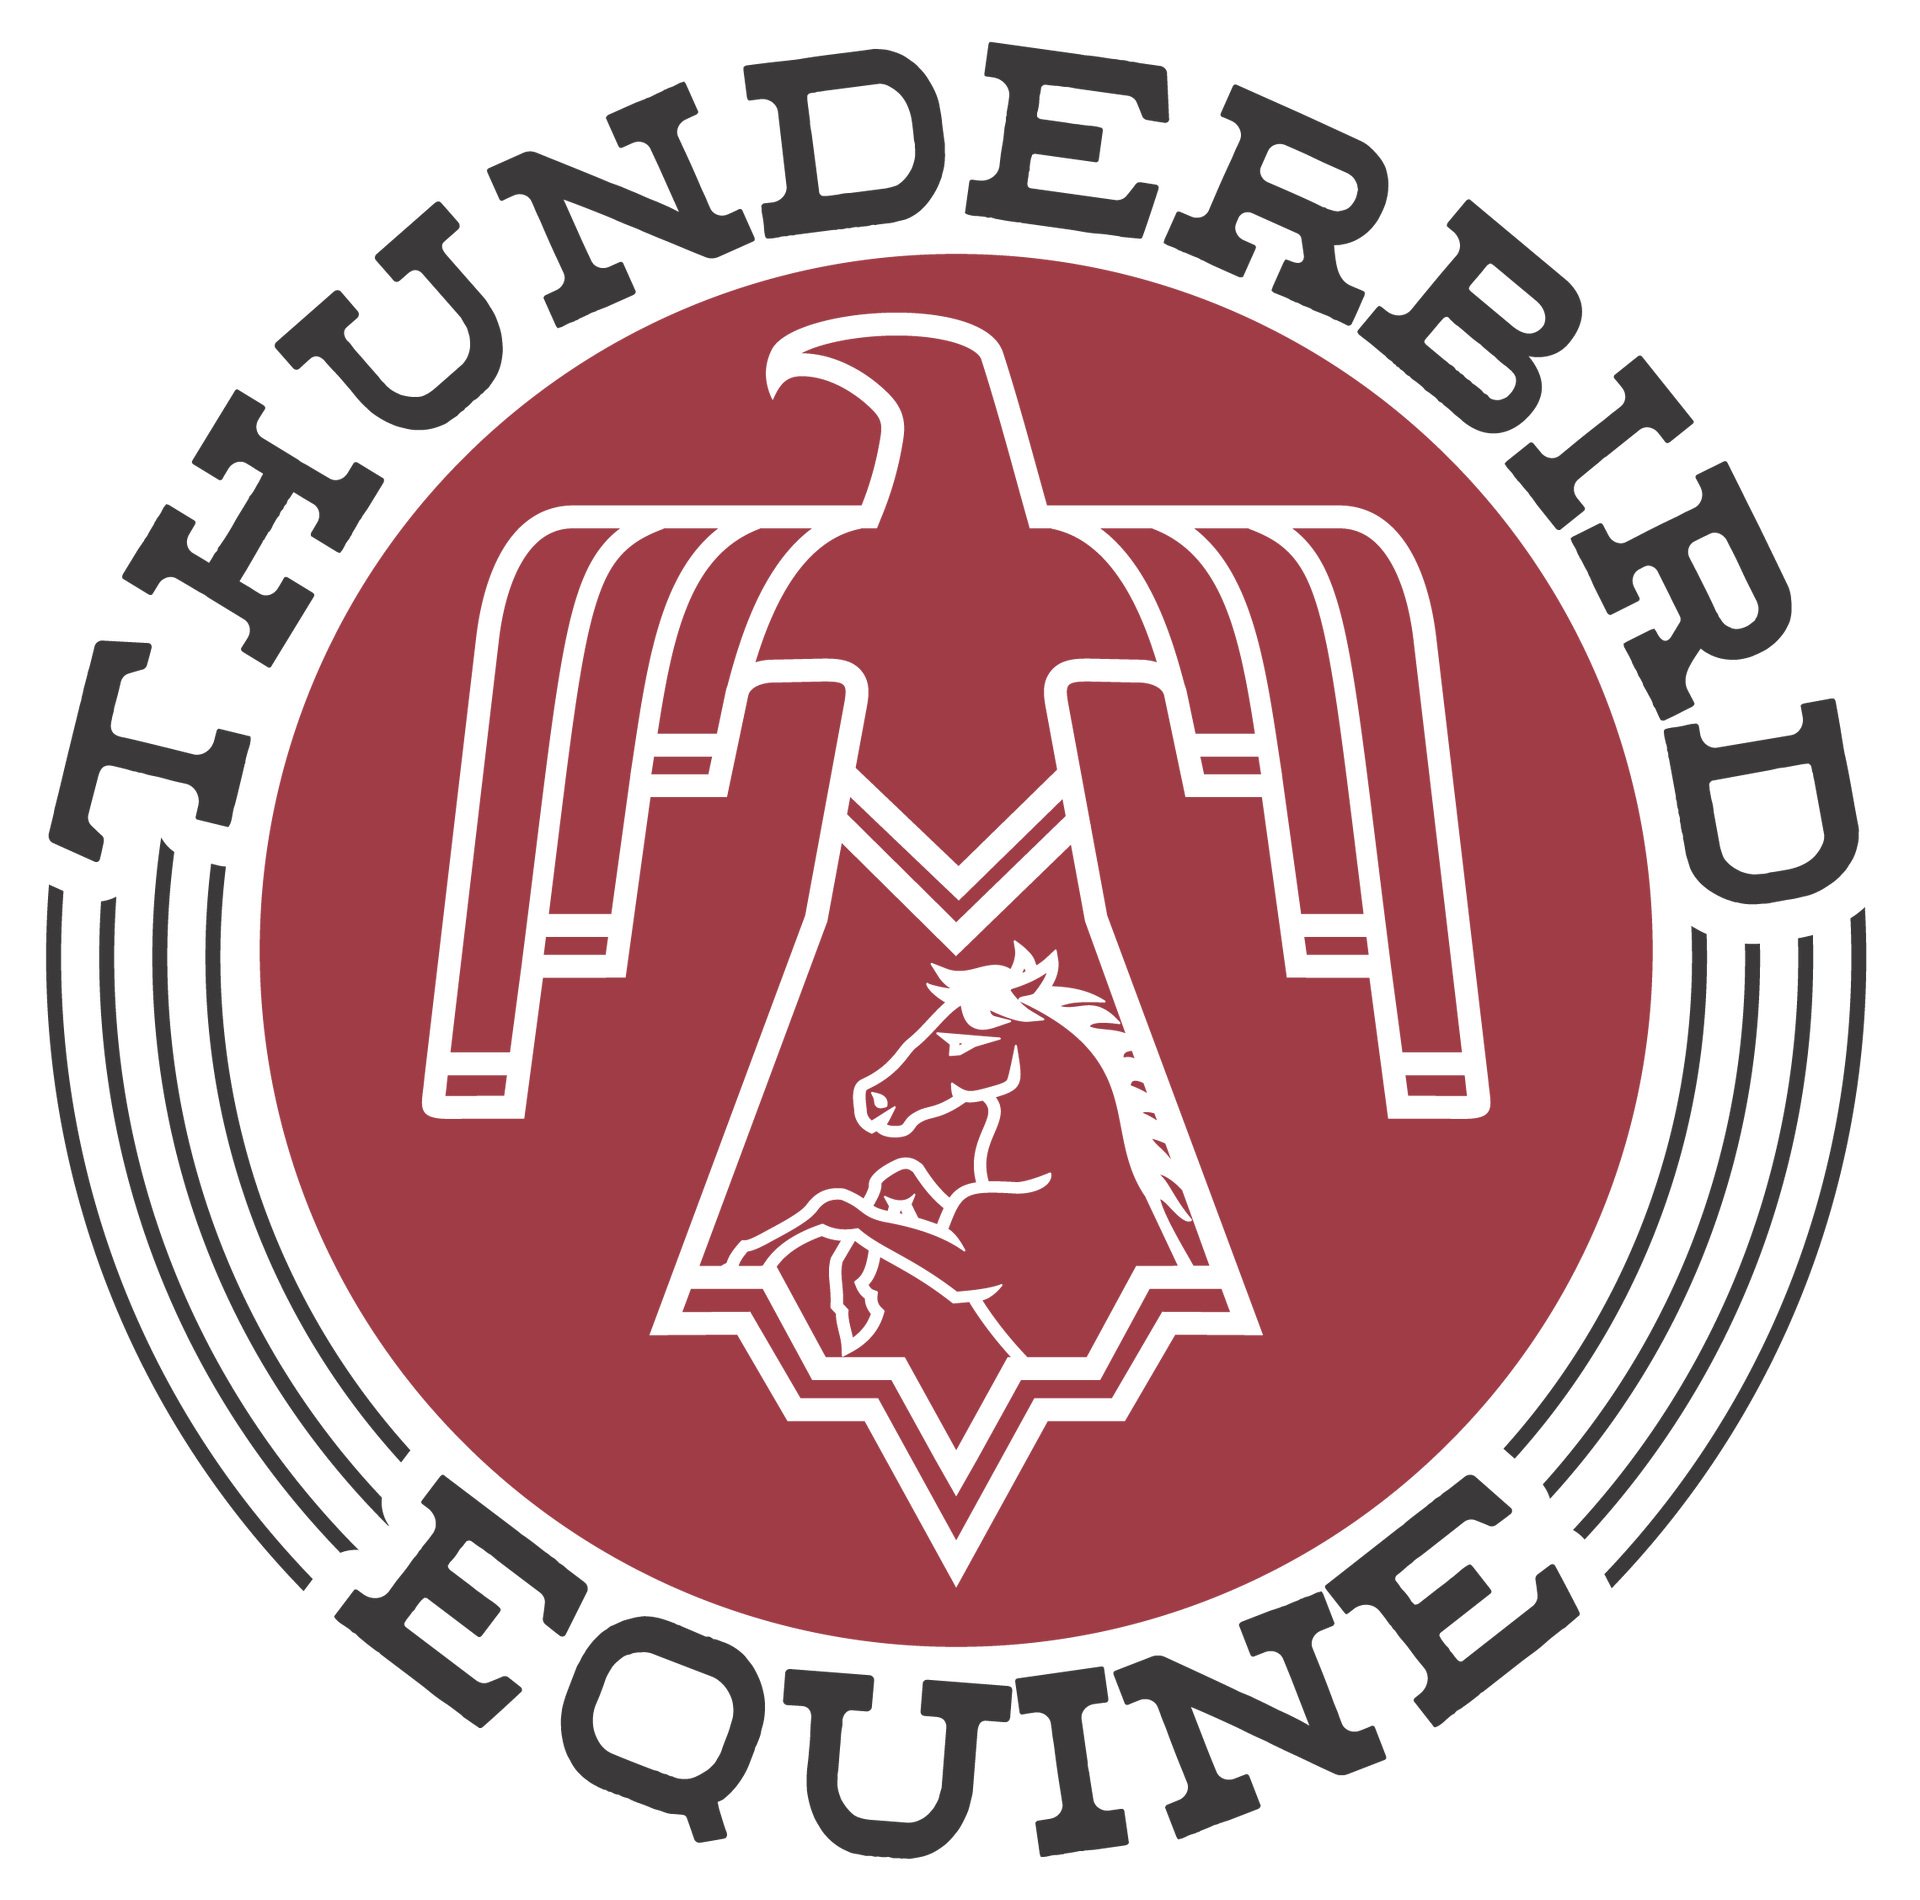 The logo for thunderbird equine has an eagle and a horse on it.